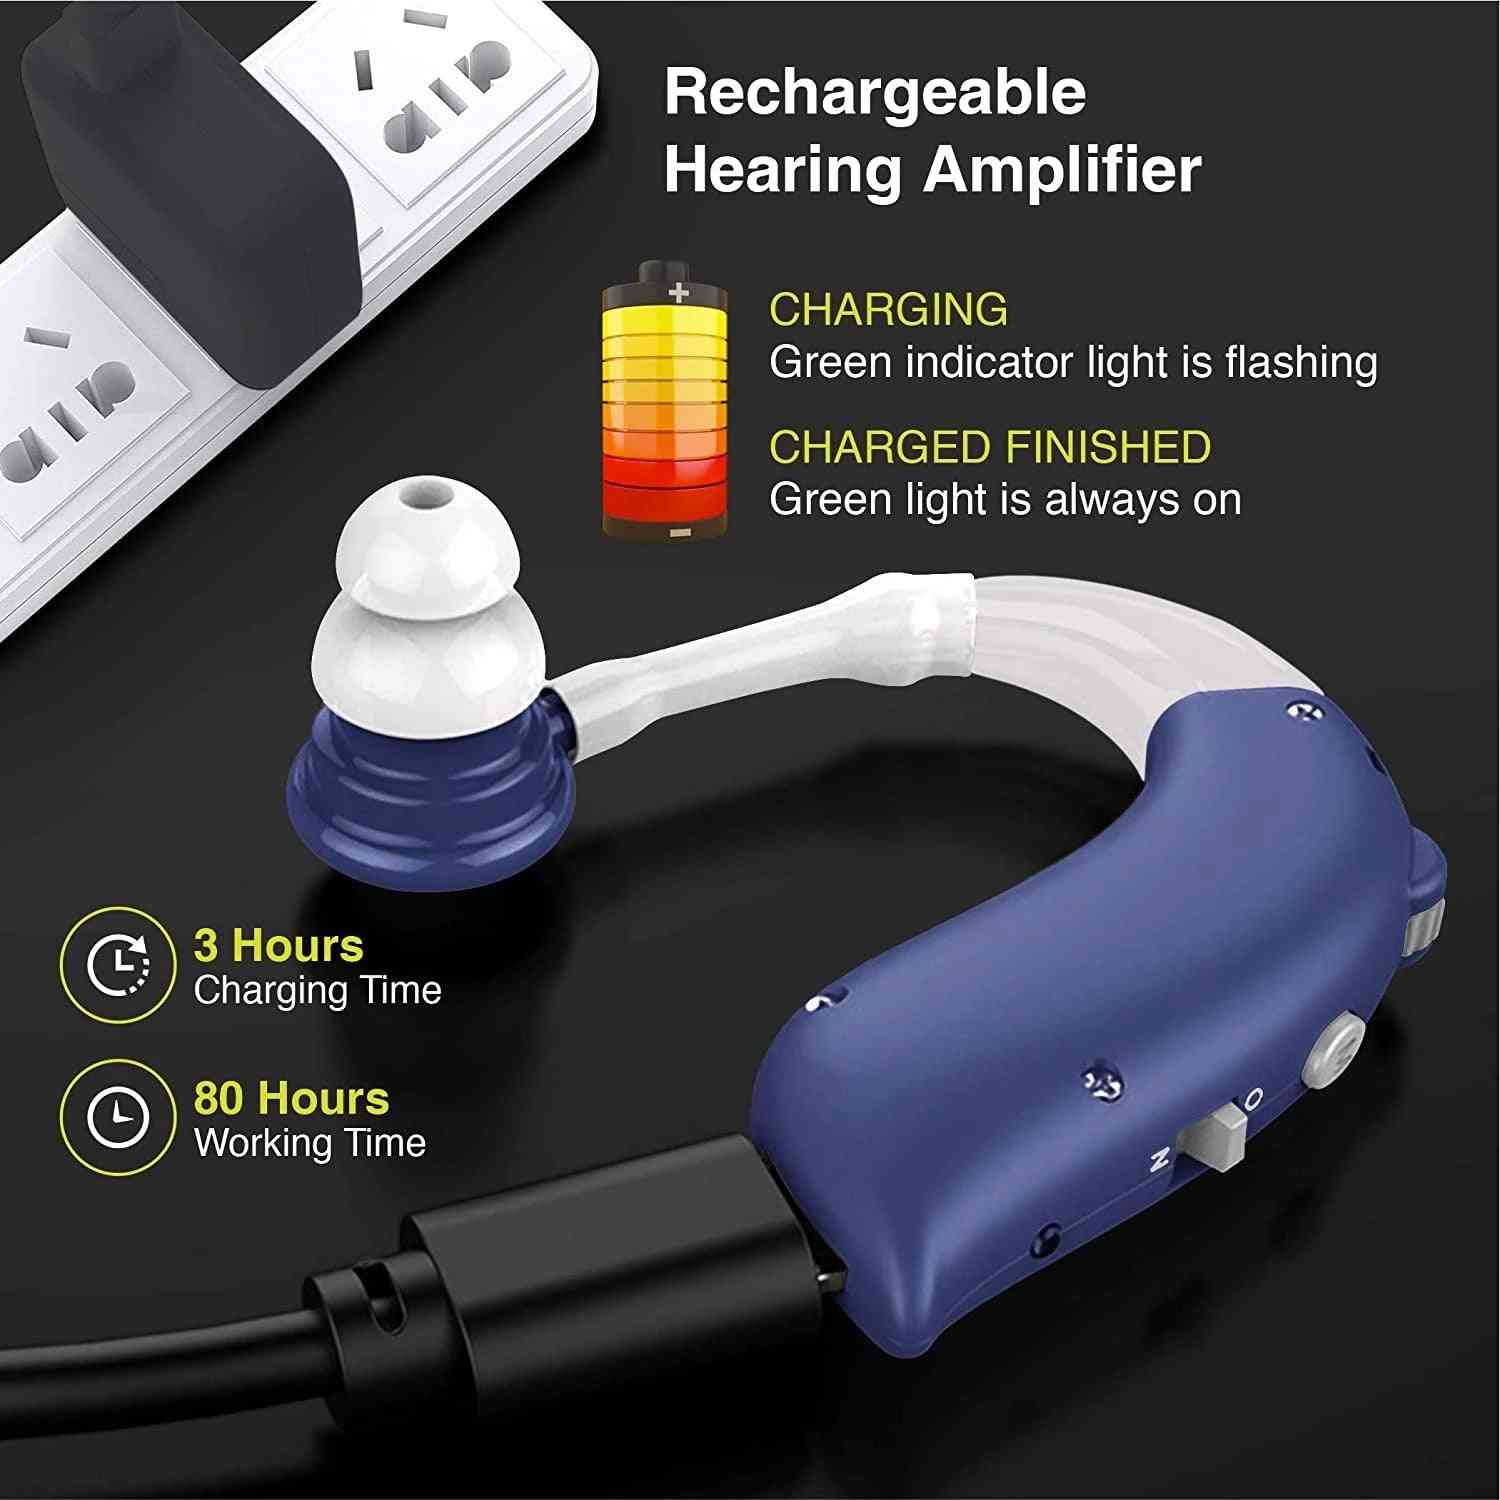 Mini Rechargeable Adjustable Tone Sound Amplifier Hearing Aid Deaf